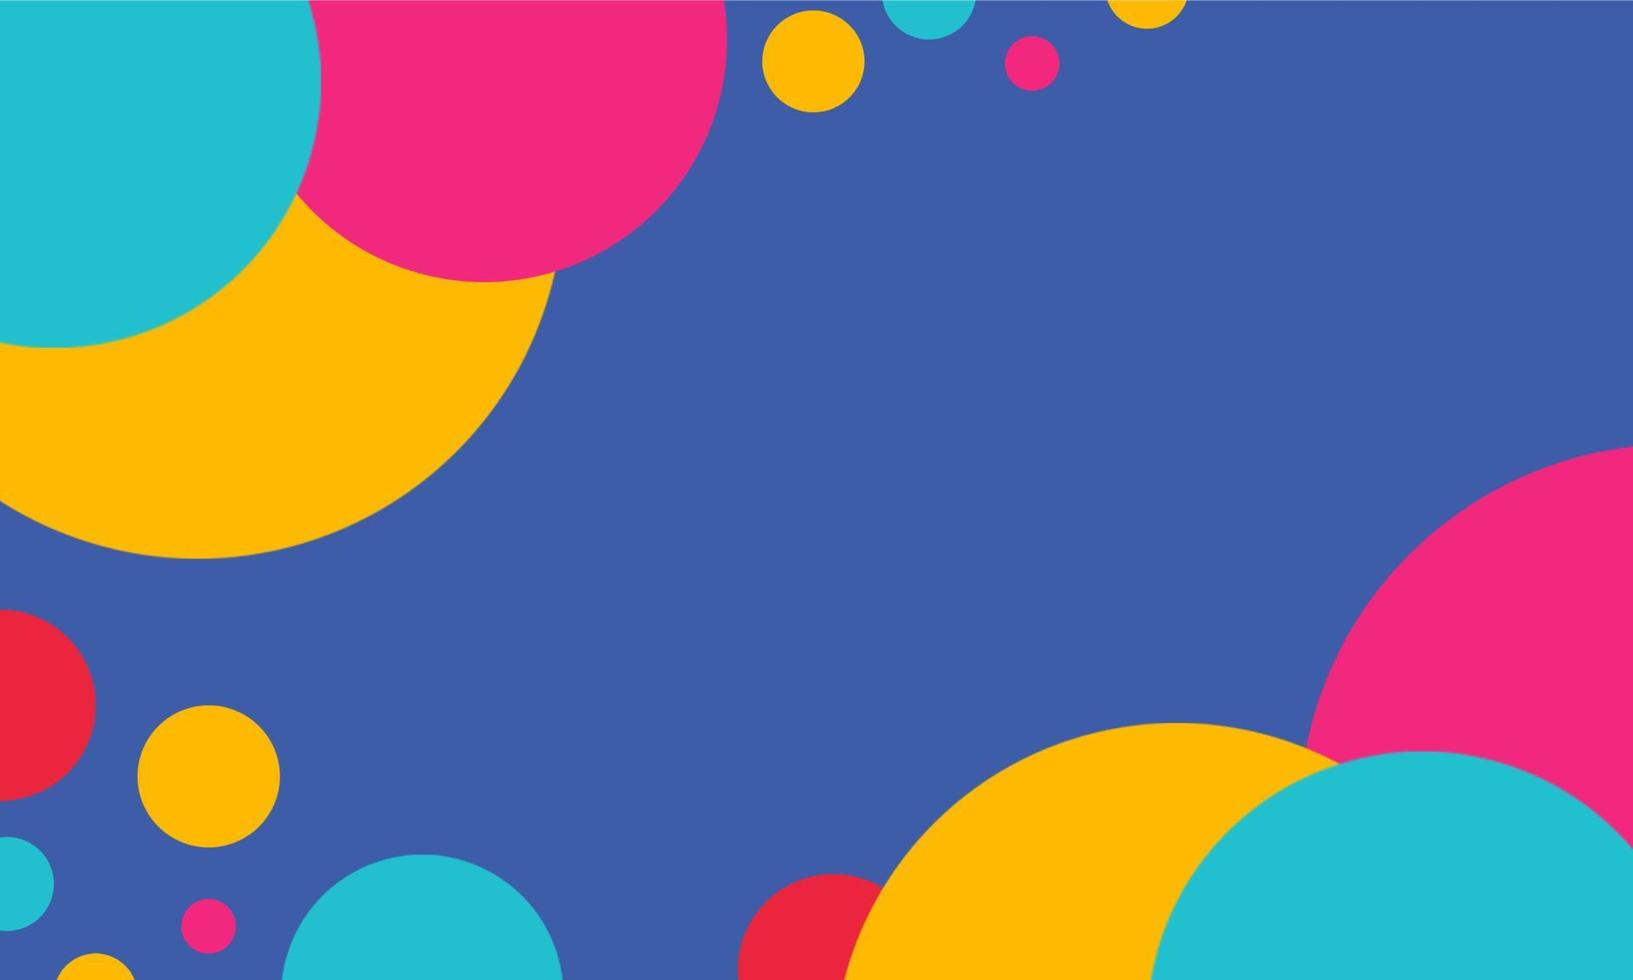 Colored circles dispersed in a blue background illustration vector